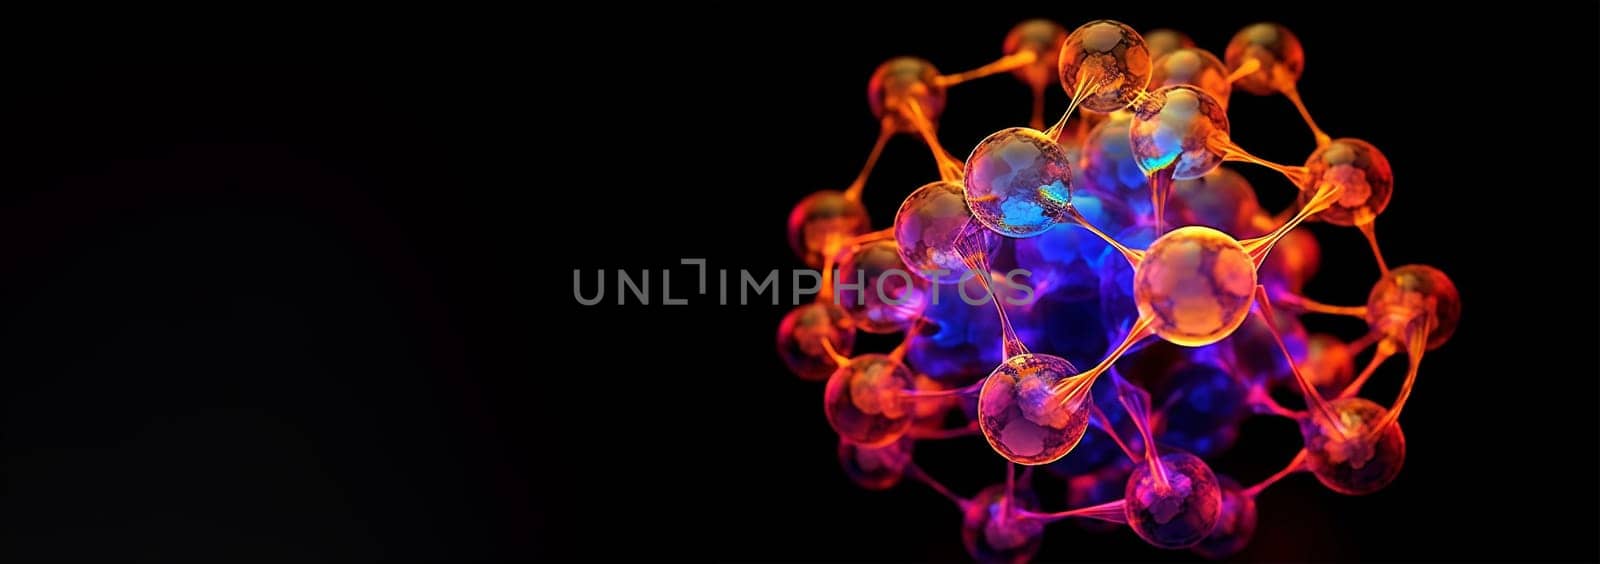 Neon light molecule black background. Alternative hydrogen energy futuristic concept with glowing low polygonal hydrogen molecules and place for text on dark black background. Modern abstract wire frame mesh design illustration. DNA by Annebel146